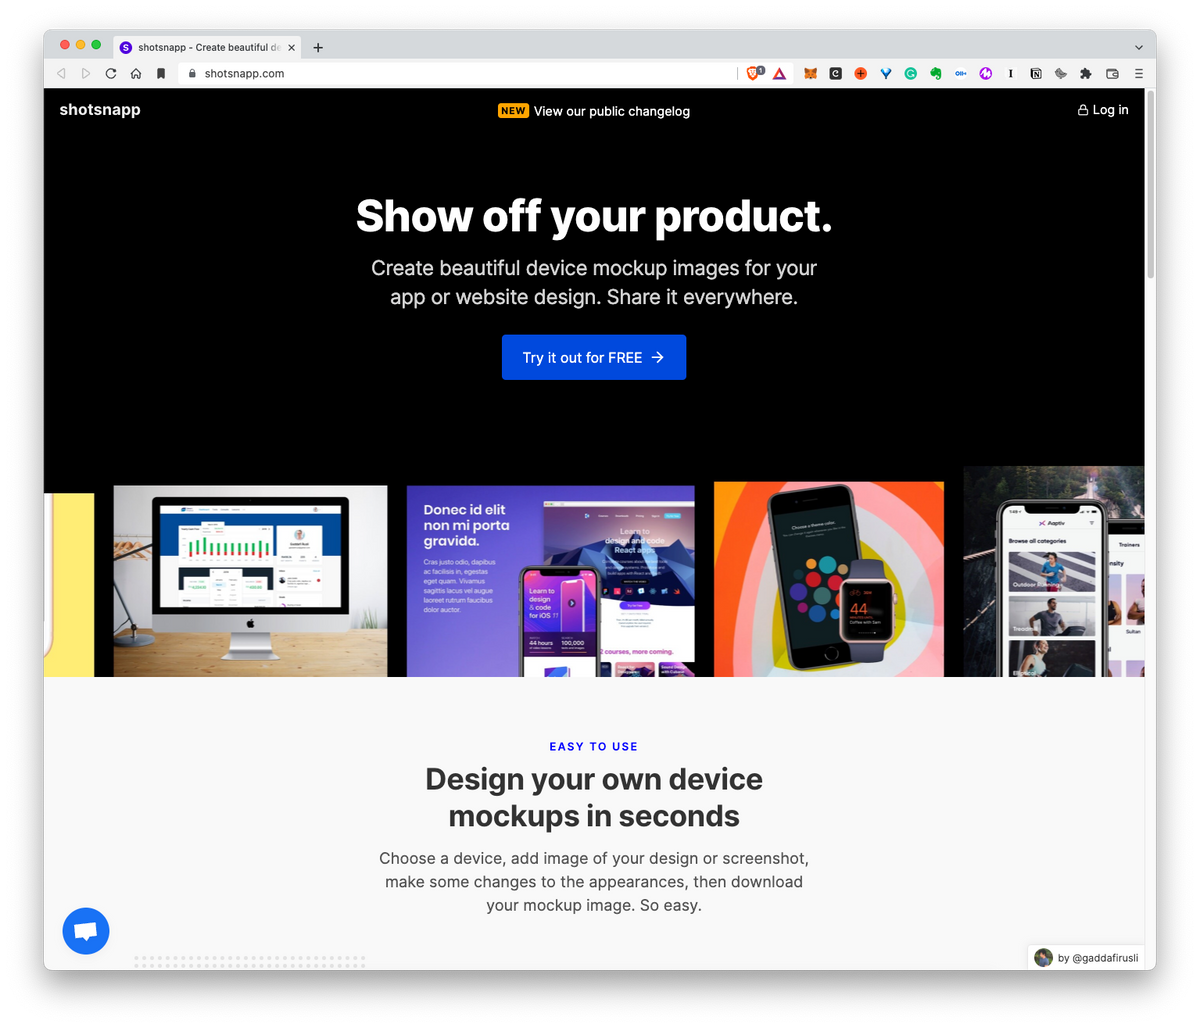 Shotsnapp: Design your own device mockups in seconds.